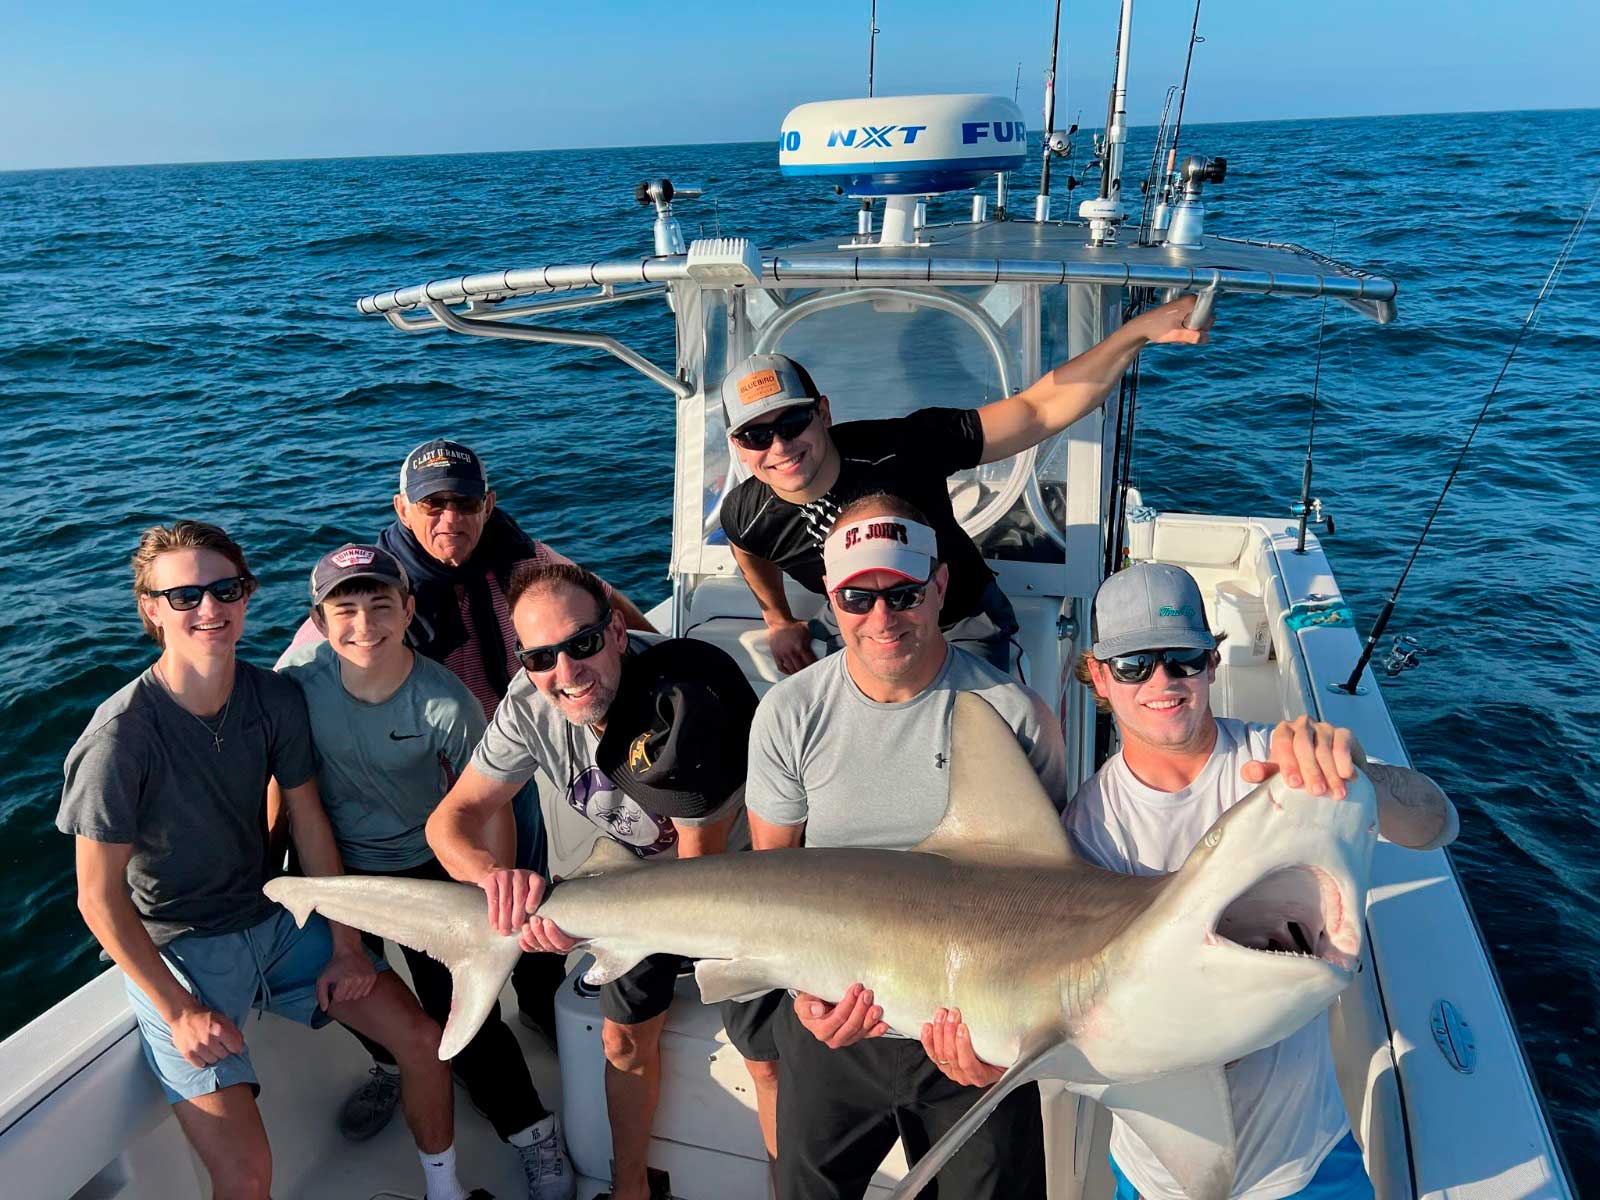 Celebrate the New Year with a Florida Fishing Charter Adventure!